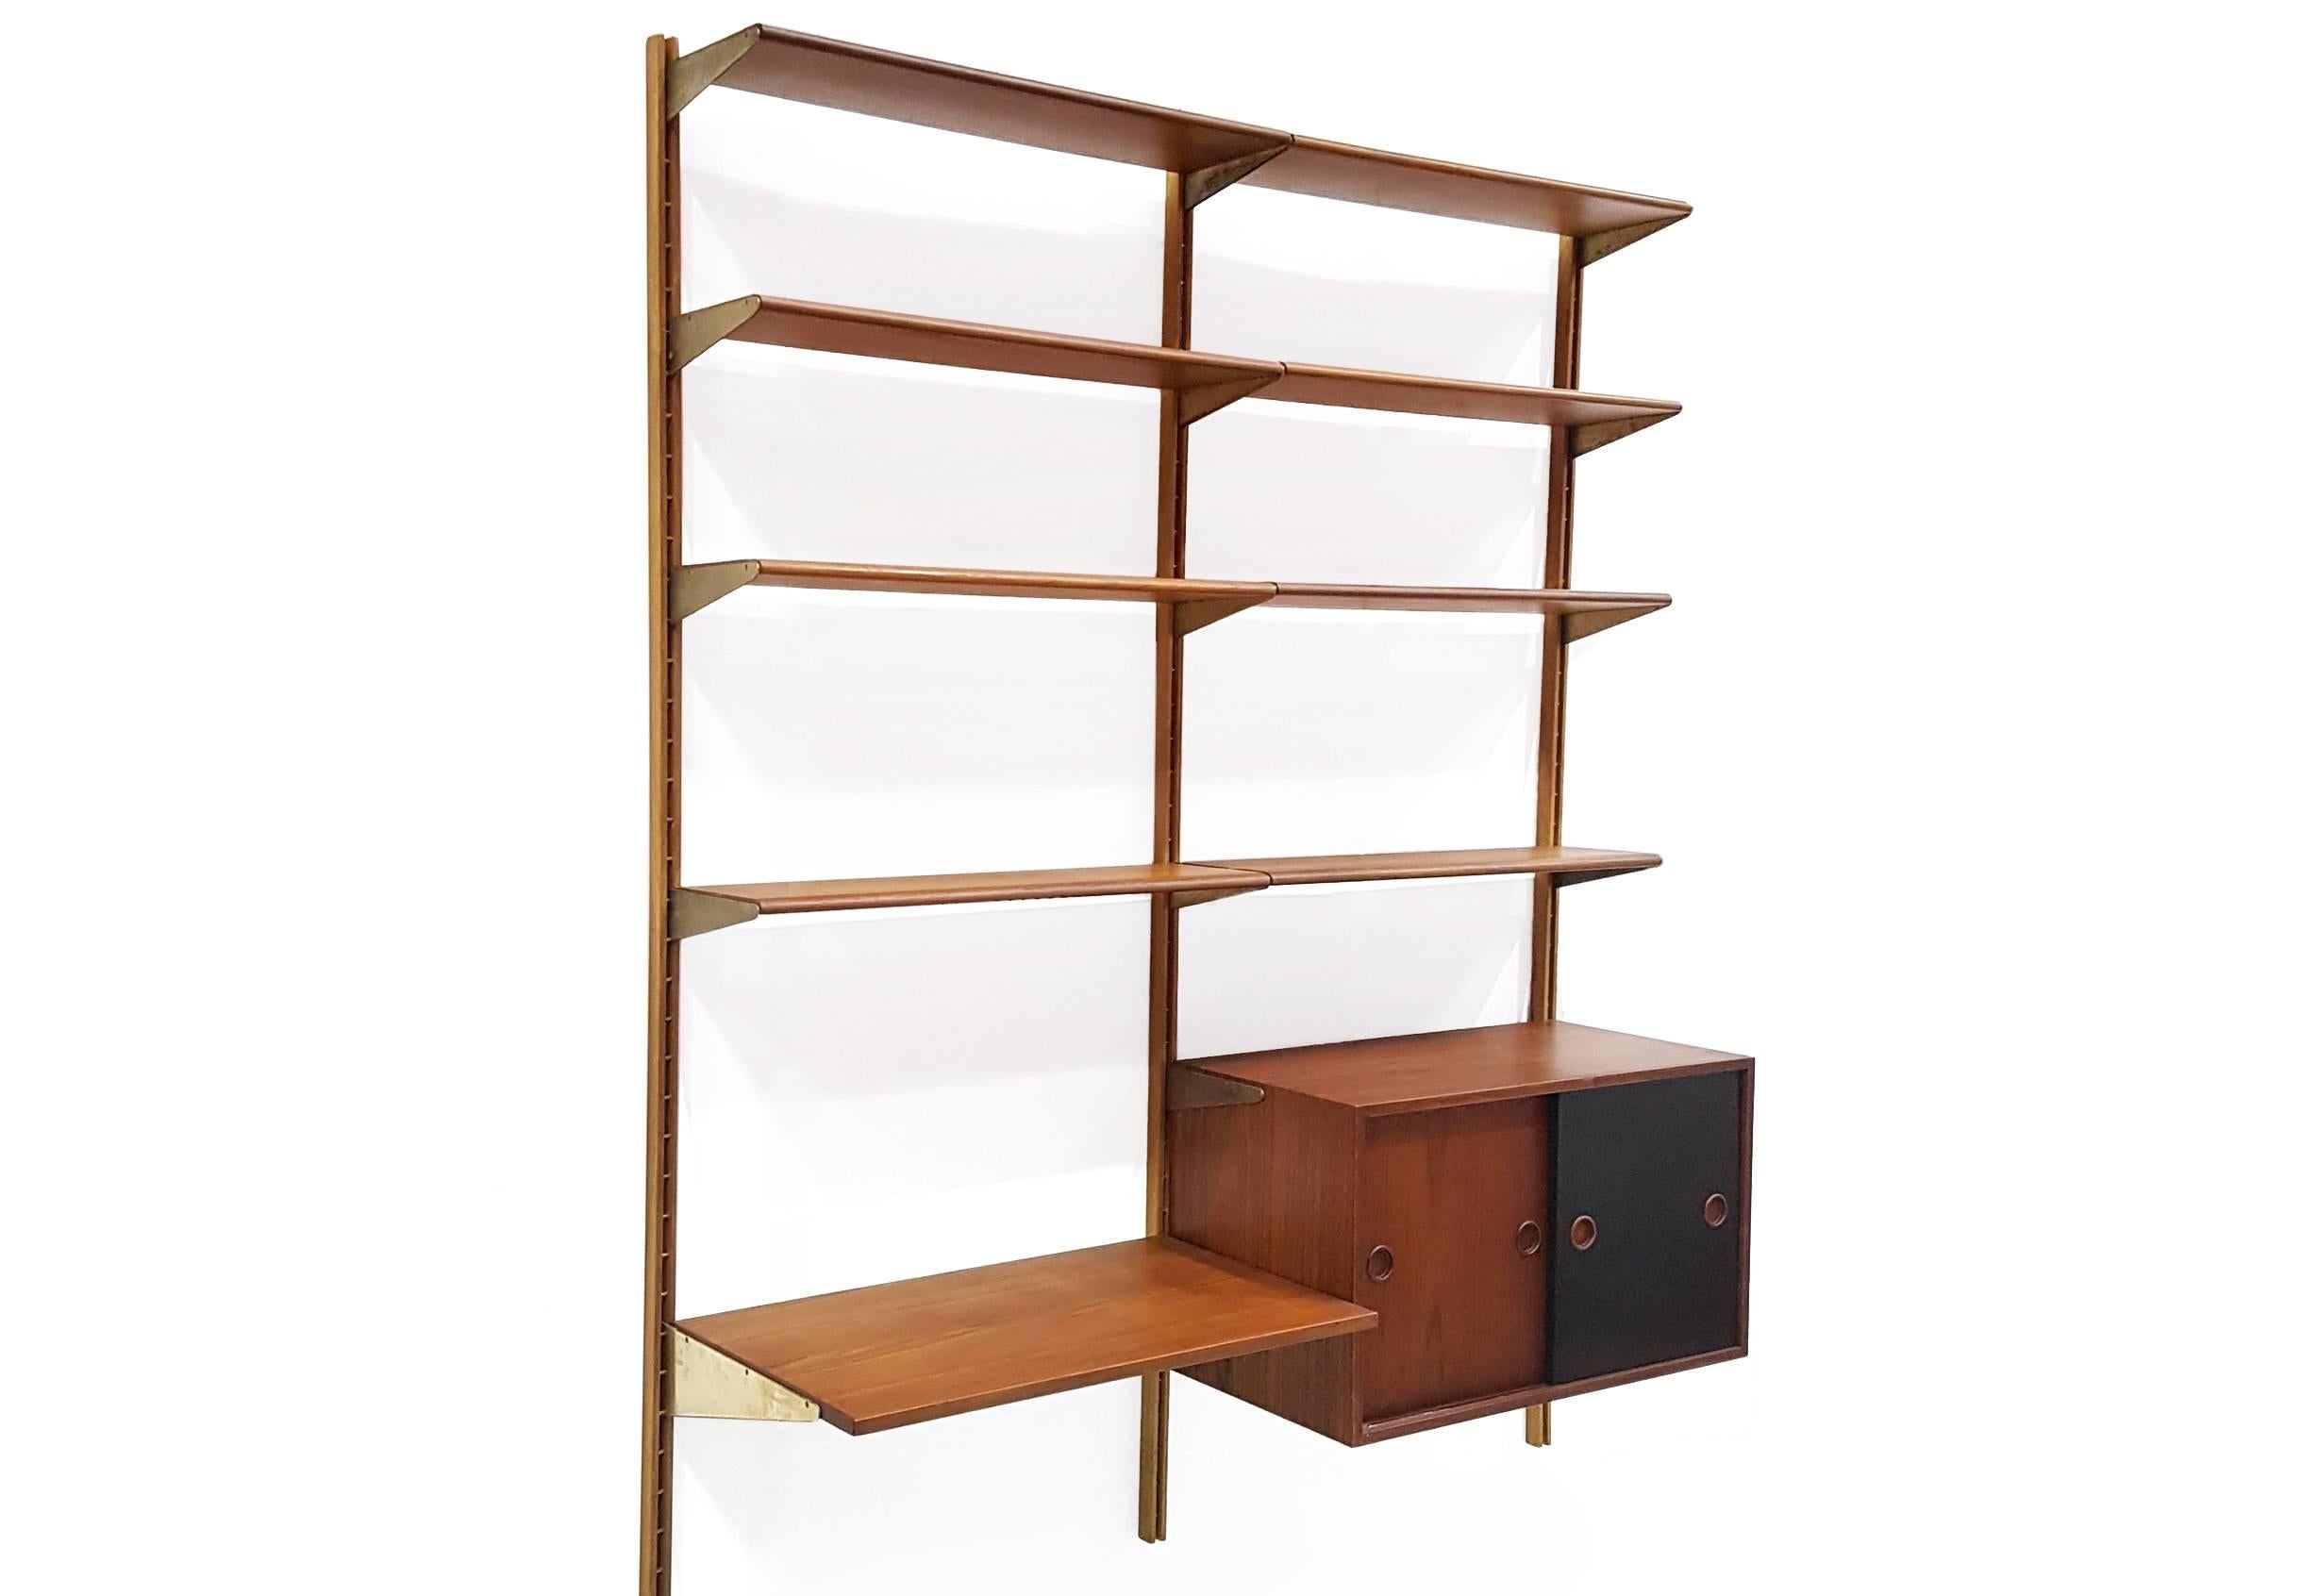 Teak wooden wall unit designed by Finn Juhl and produced by Bovirke Denmark, in the 1950s.
This wall unit offers a cabinet with two sliding doors, one deep shelf which can be used as a desk (45 cm deep) and eight shelves.
The shelves are wonderful